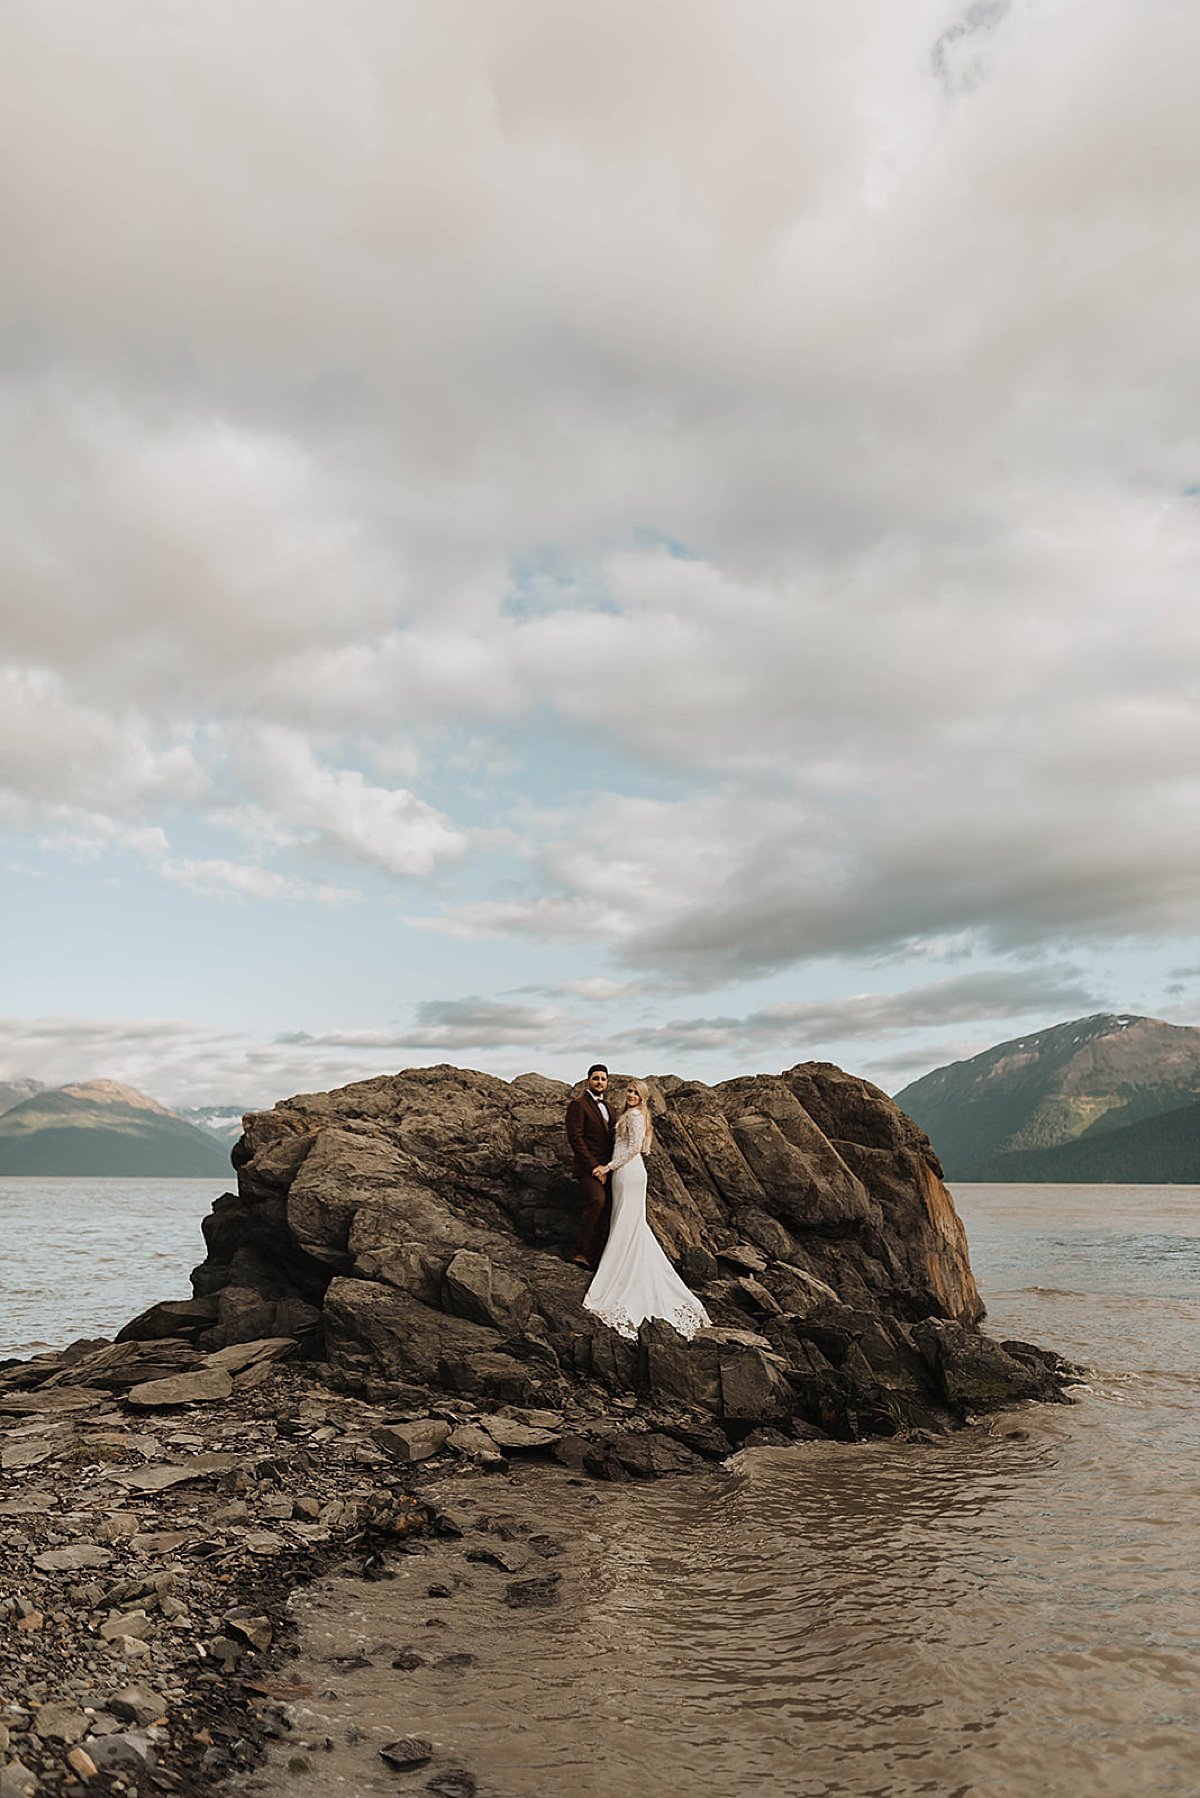  just-married bride and groom pose in dramatic rocky outcrop at mountain lake after moody glacier creek wedding 